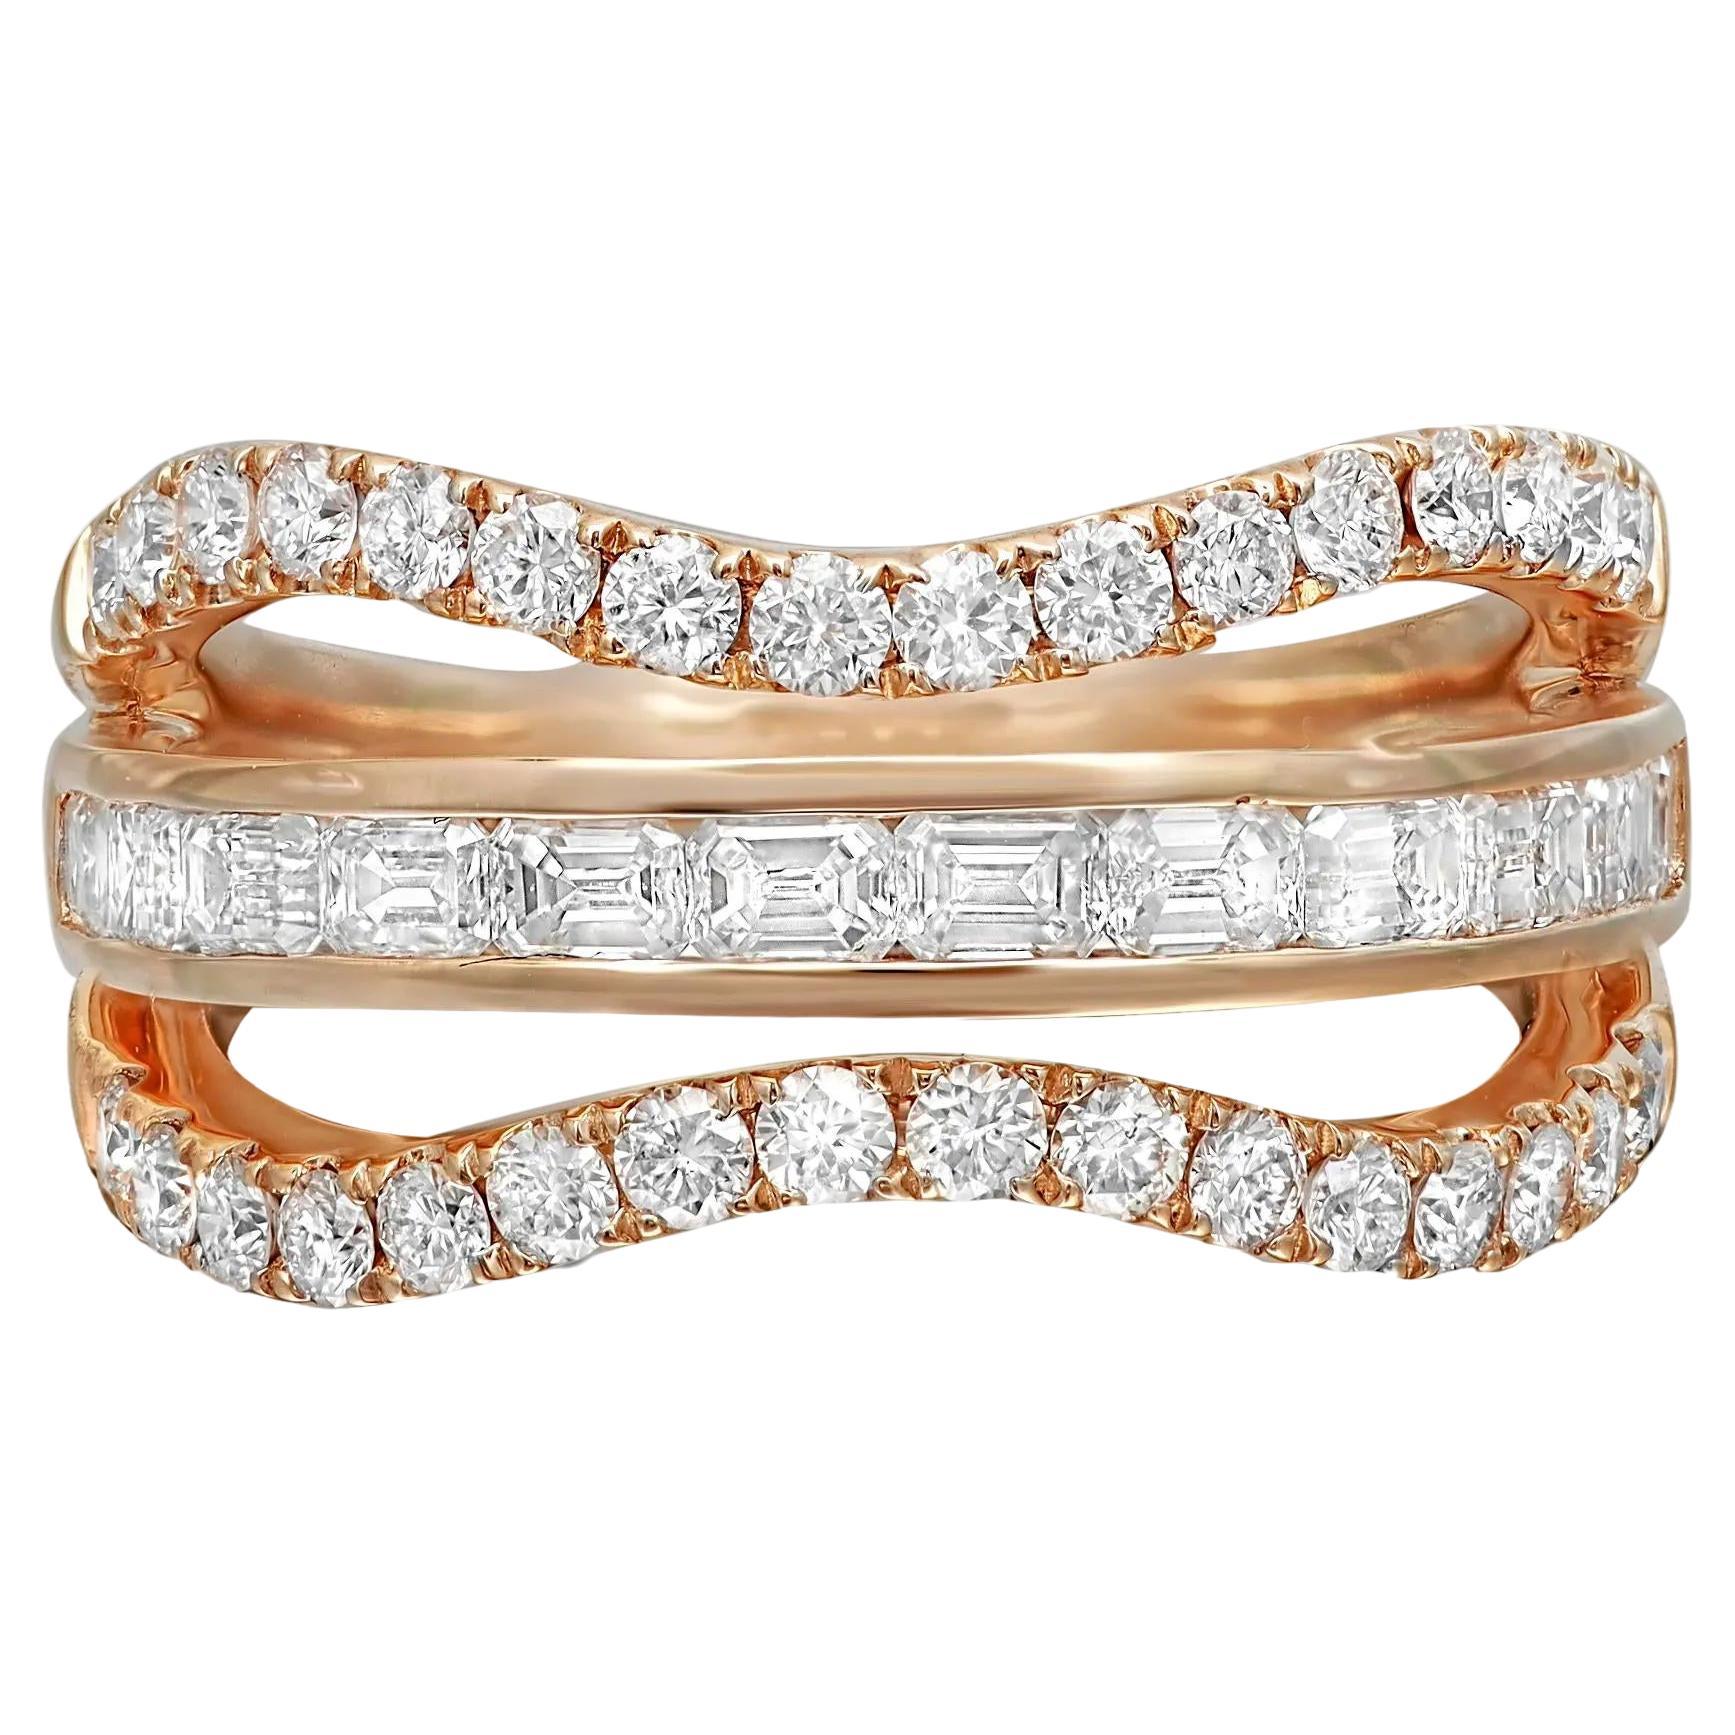 Emerald Cut & Round Cut Diamond Band Ring 18K Rose Gold 1.61Cttw Size 6.5 For Sale